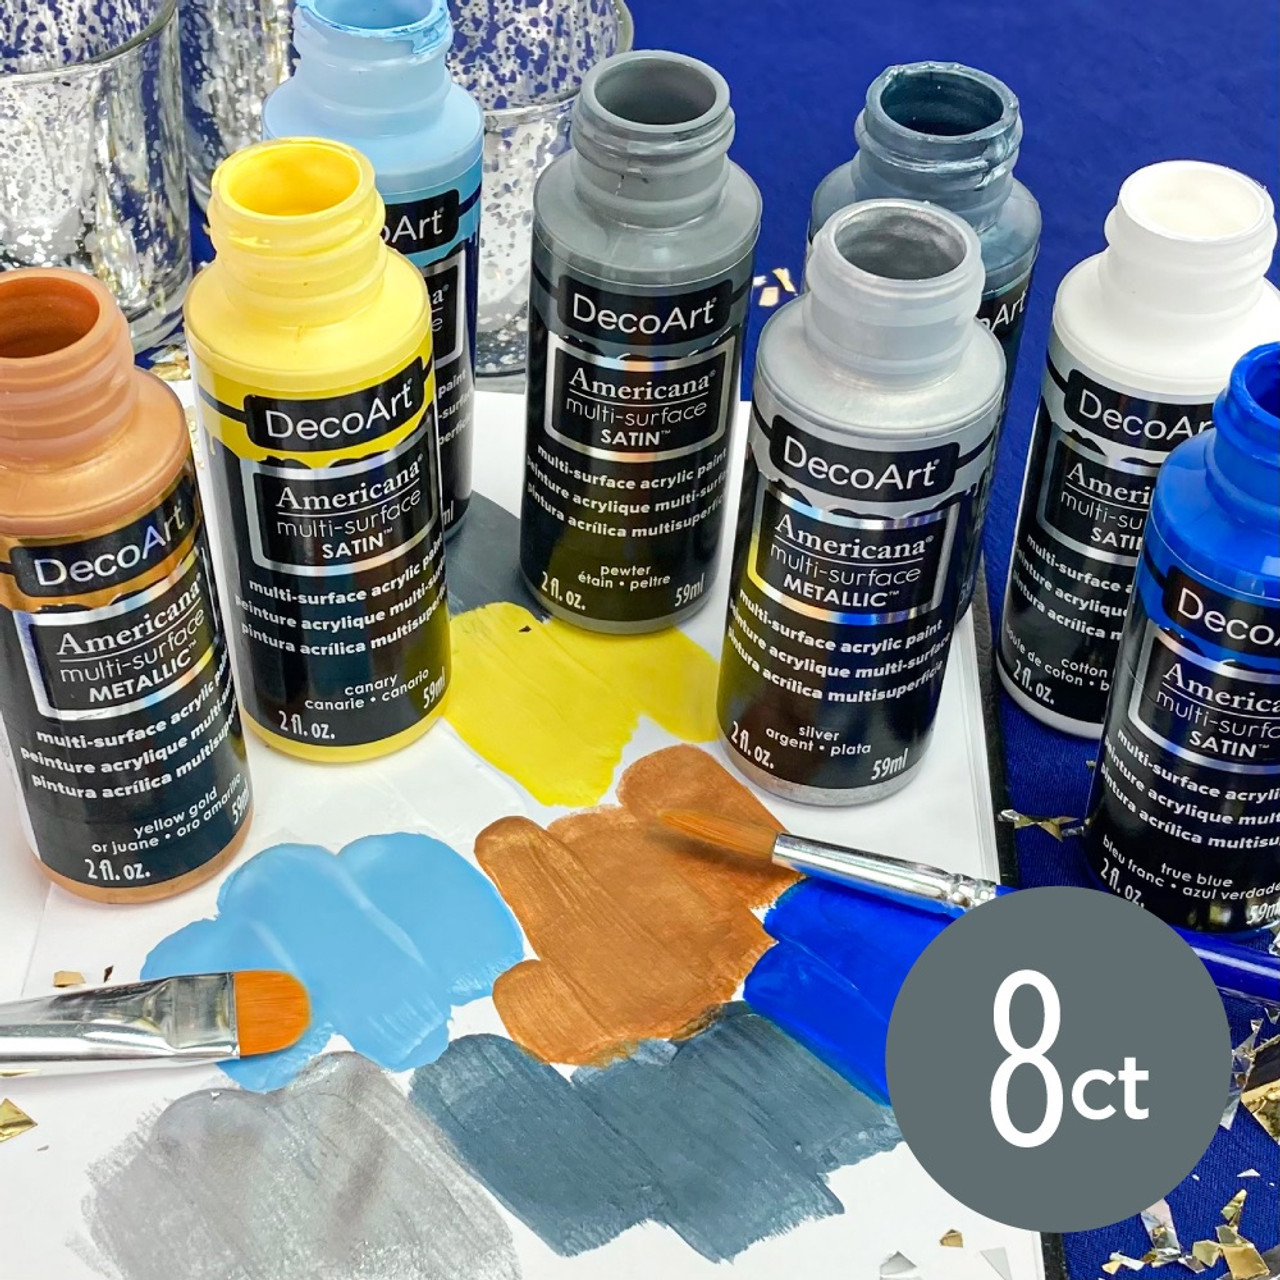 Basic Gallery Glass Stained Glass Paint - 6 Piece Set, Hobby Lobby